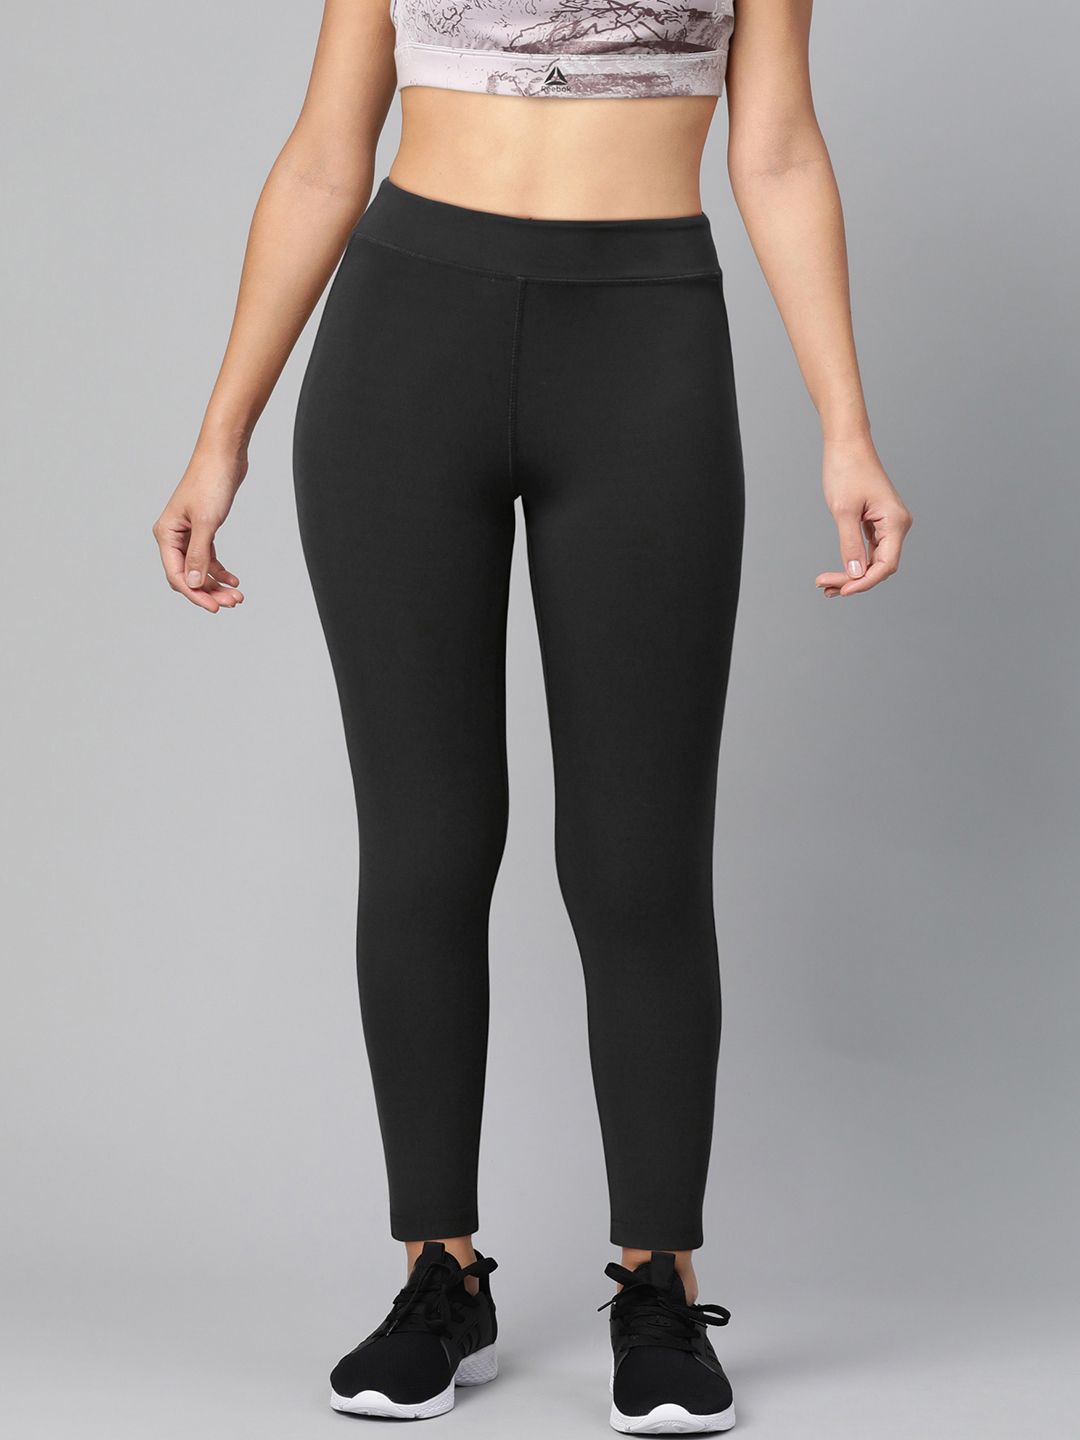 Reebok Women Black Solid Training Workout Ready PP Tights Price in India